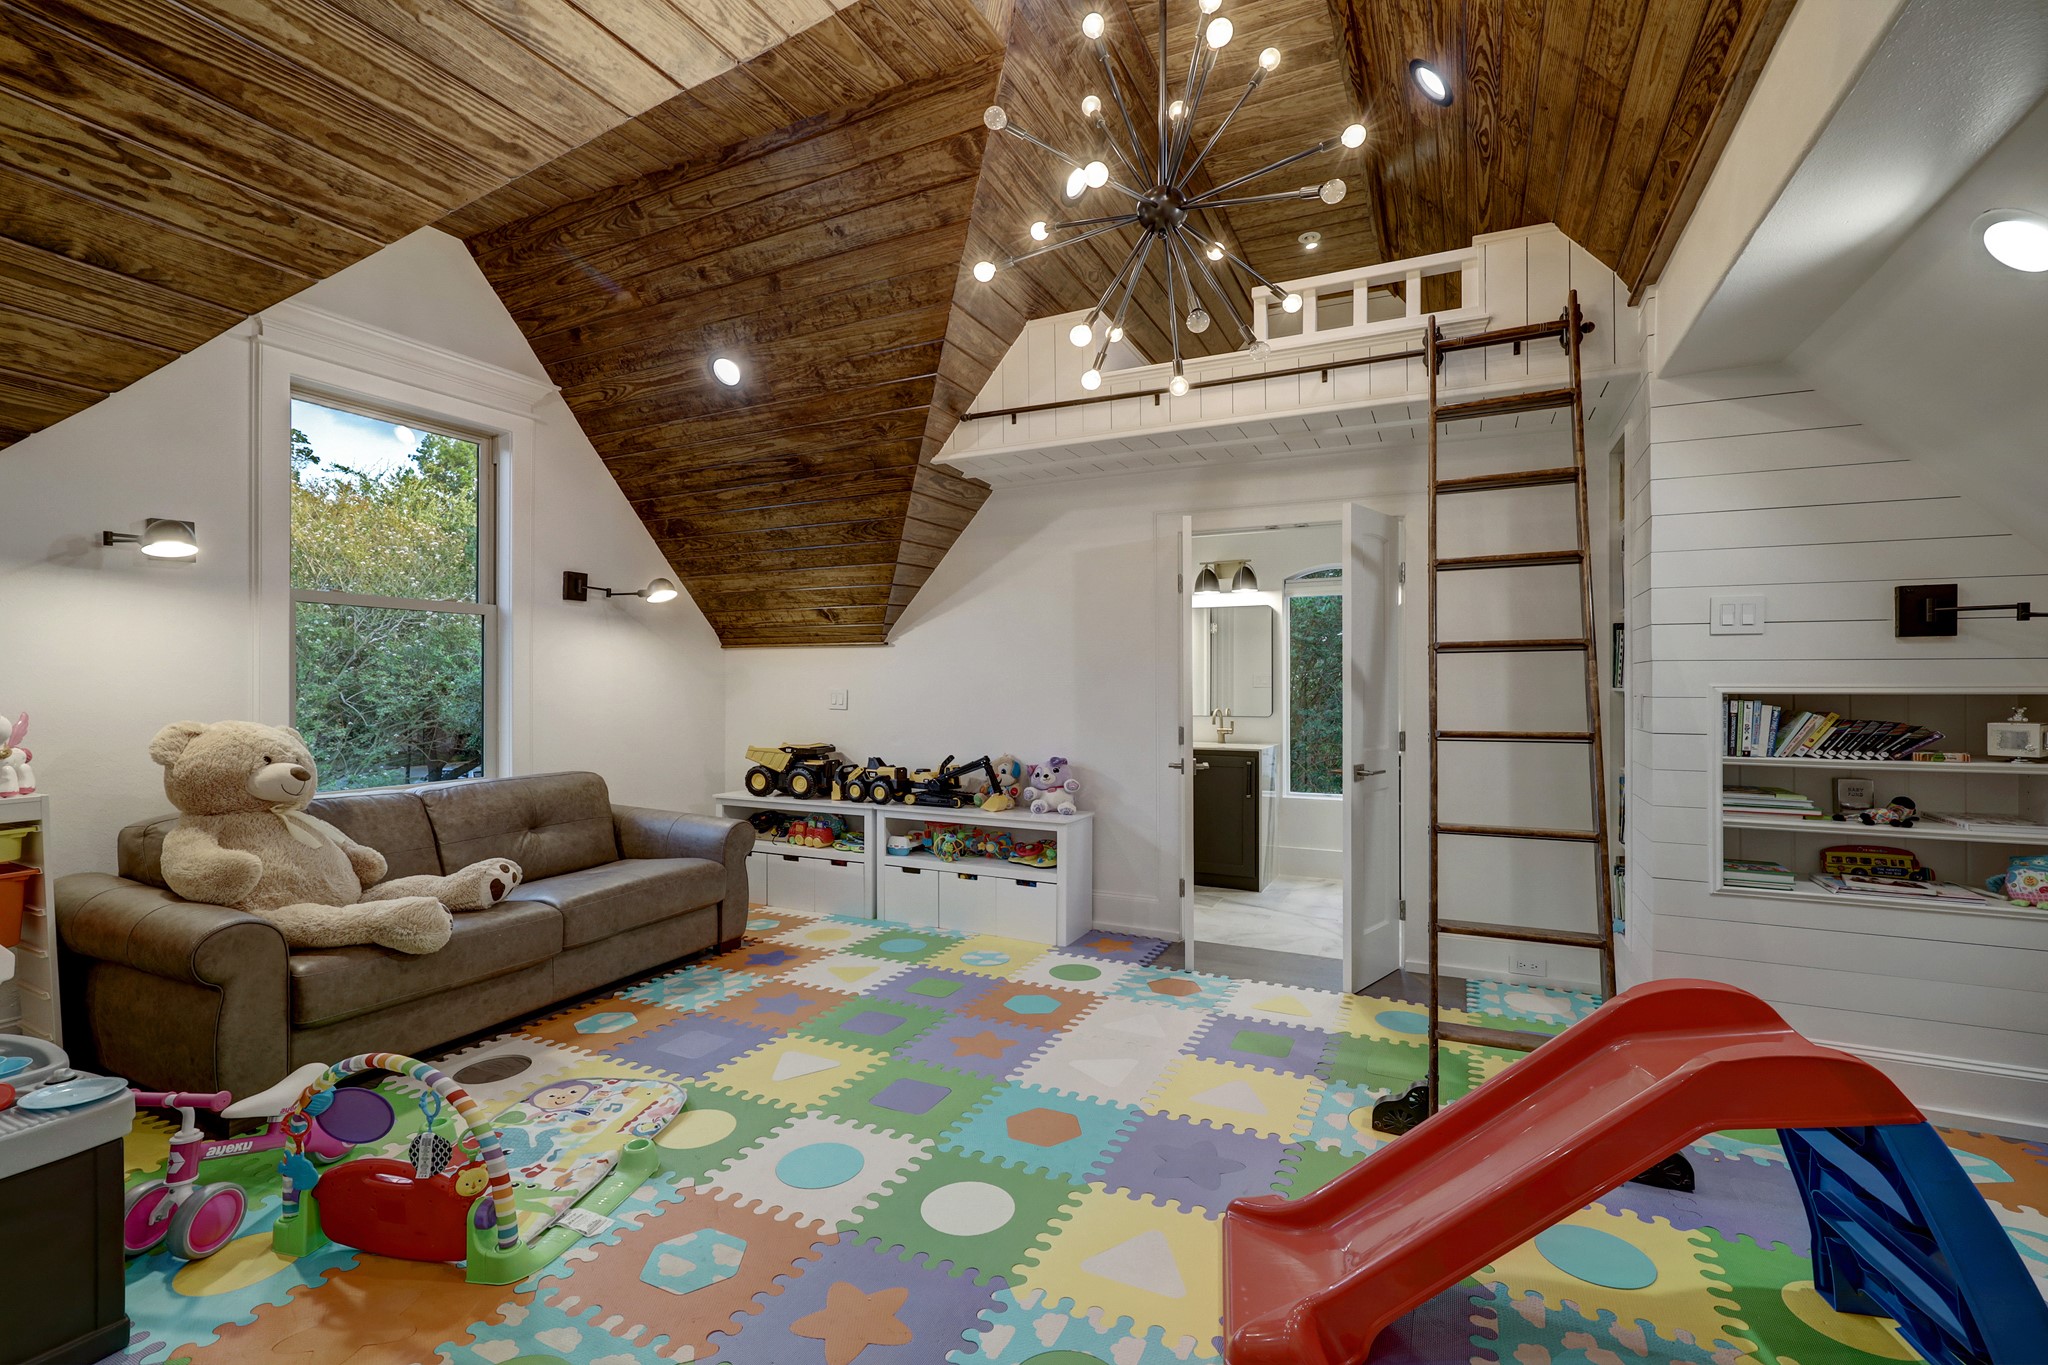 2016 Loft suite addition is every child's dream with enough room for extra beds, small library, loft and full bathroom.